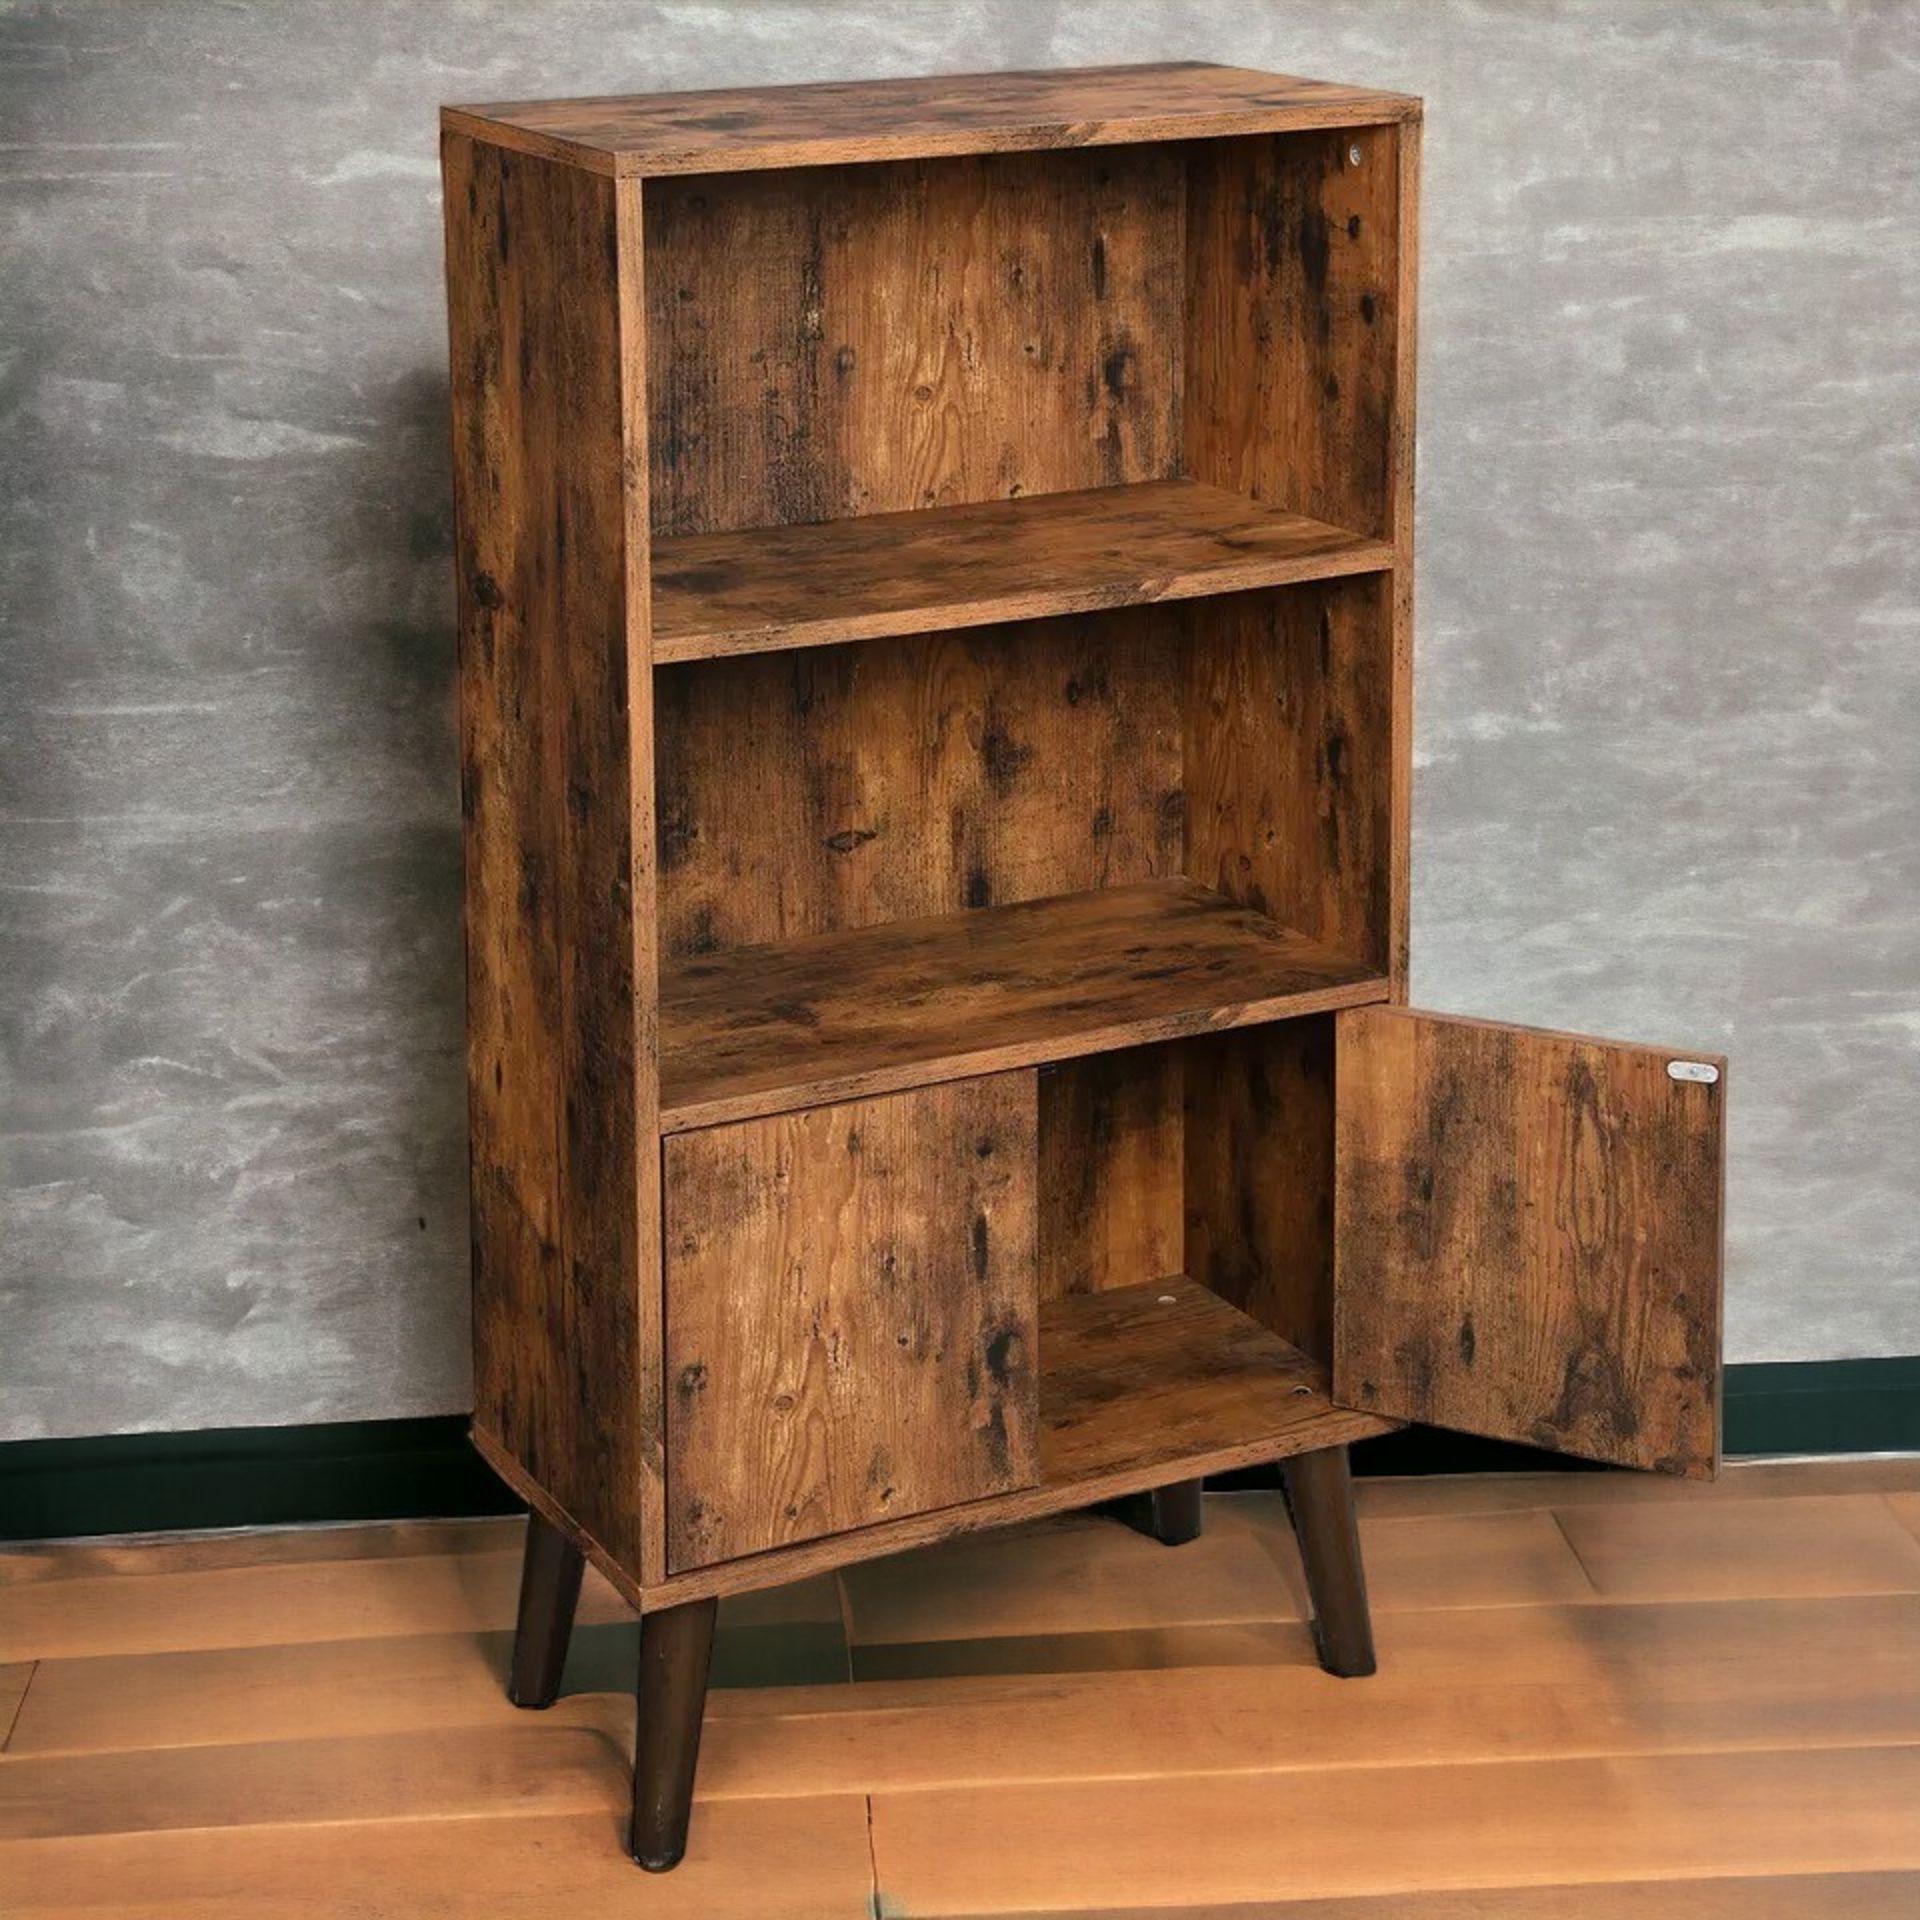 FREE DELIVERY - BRAND NEW RETRO BOOKCASE STORAGE CABINET SHELVES UNIT SHELVING DISPLAY STAND